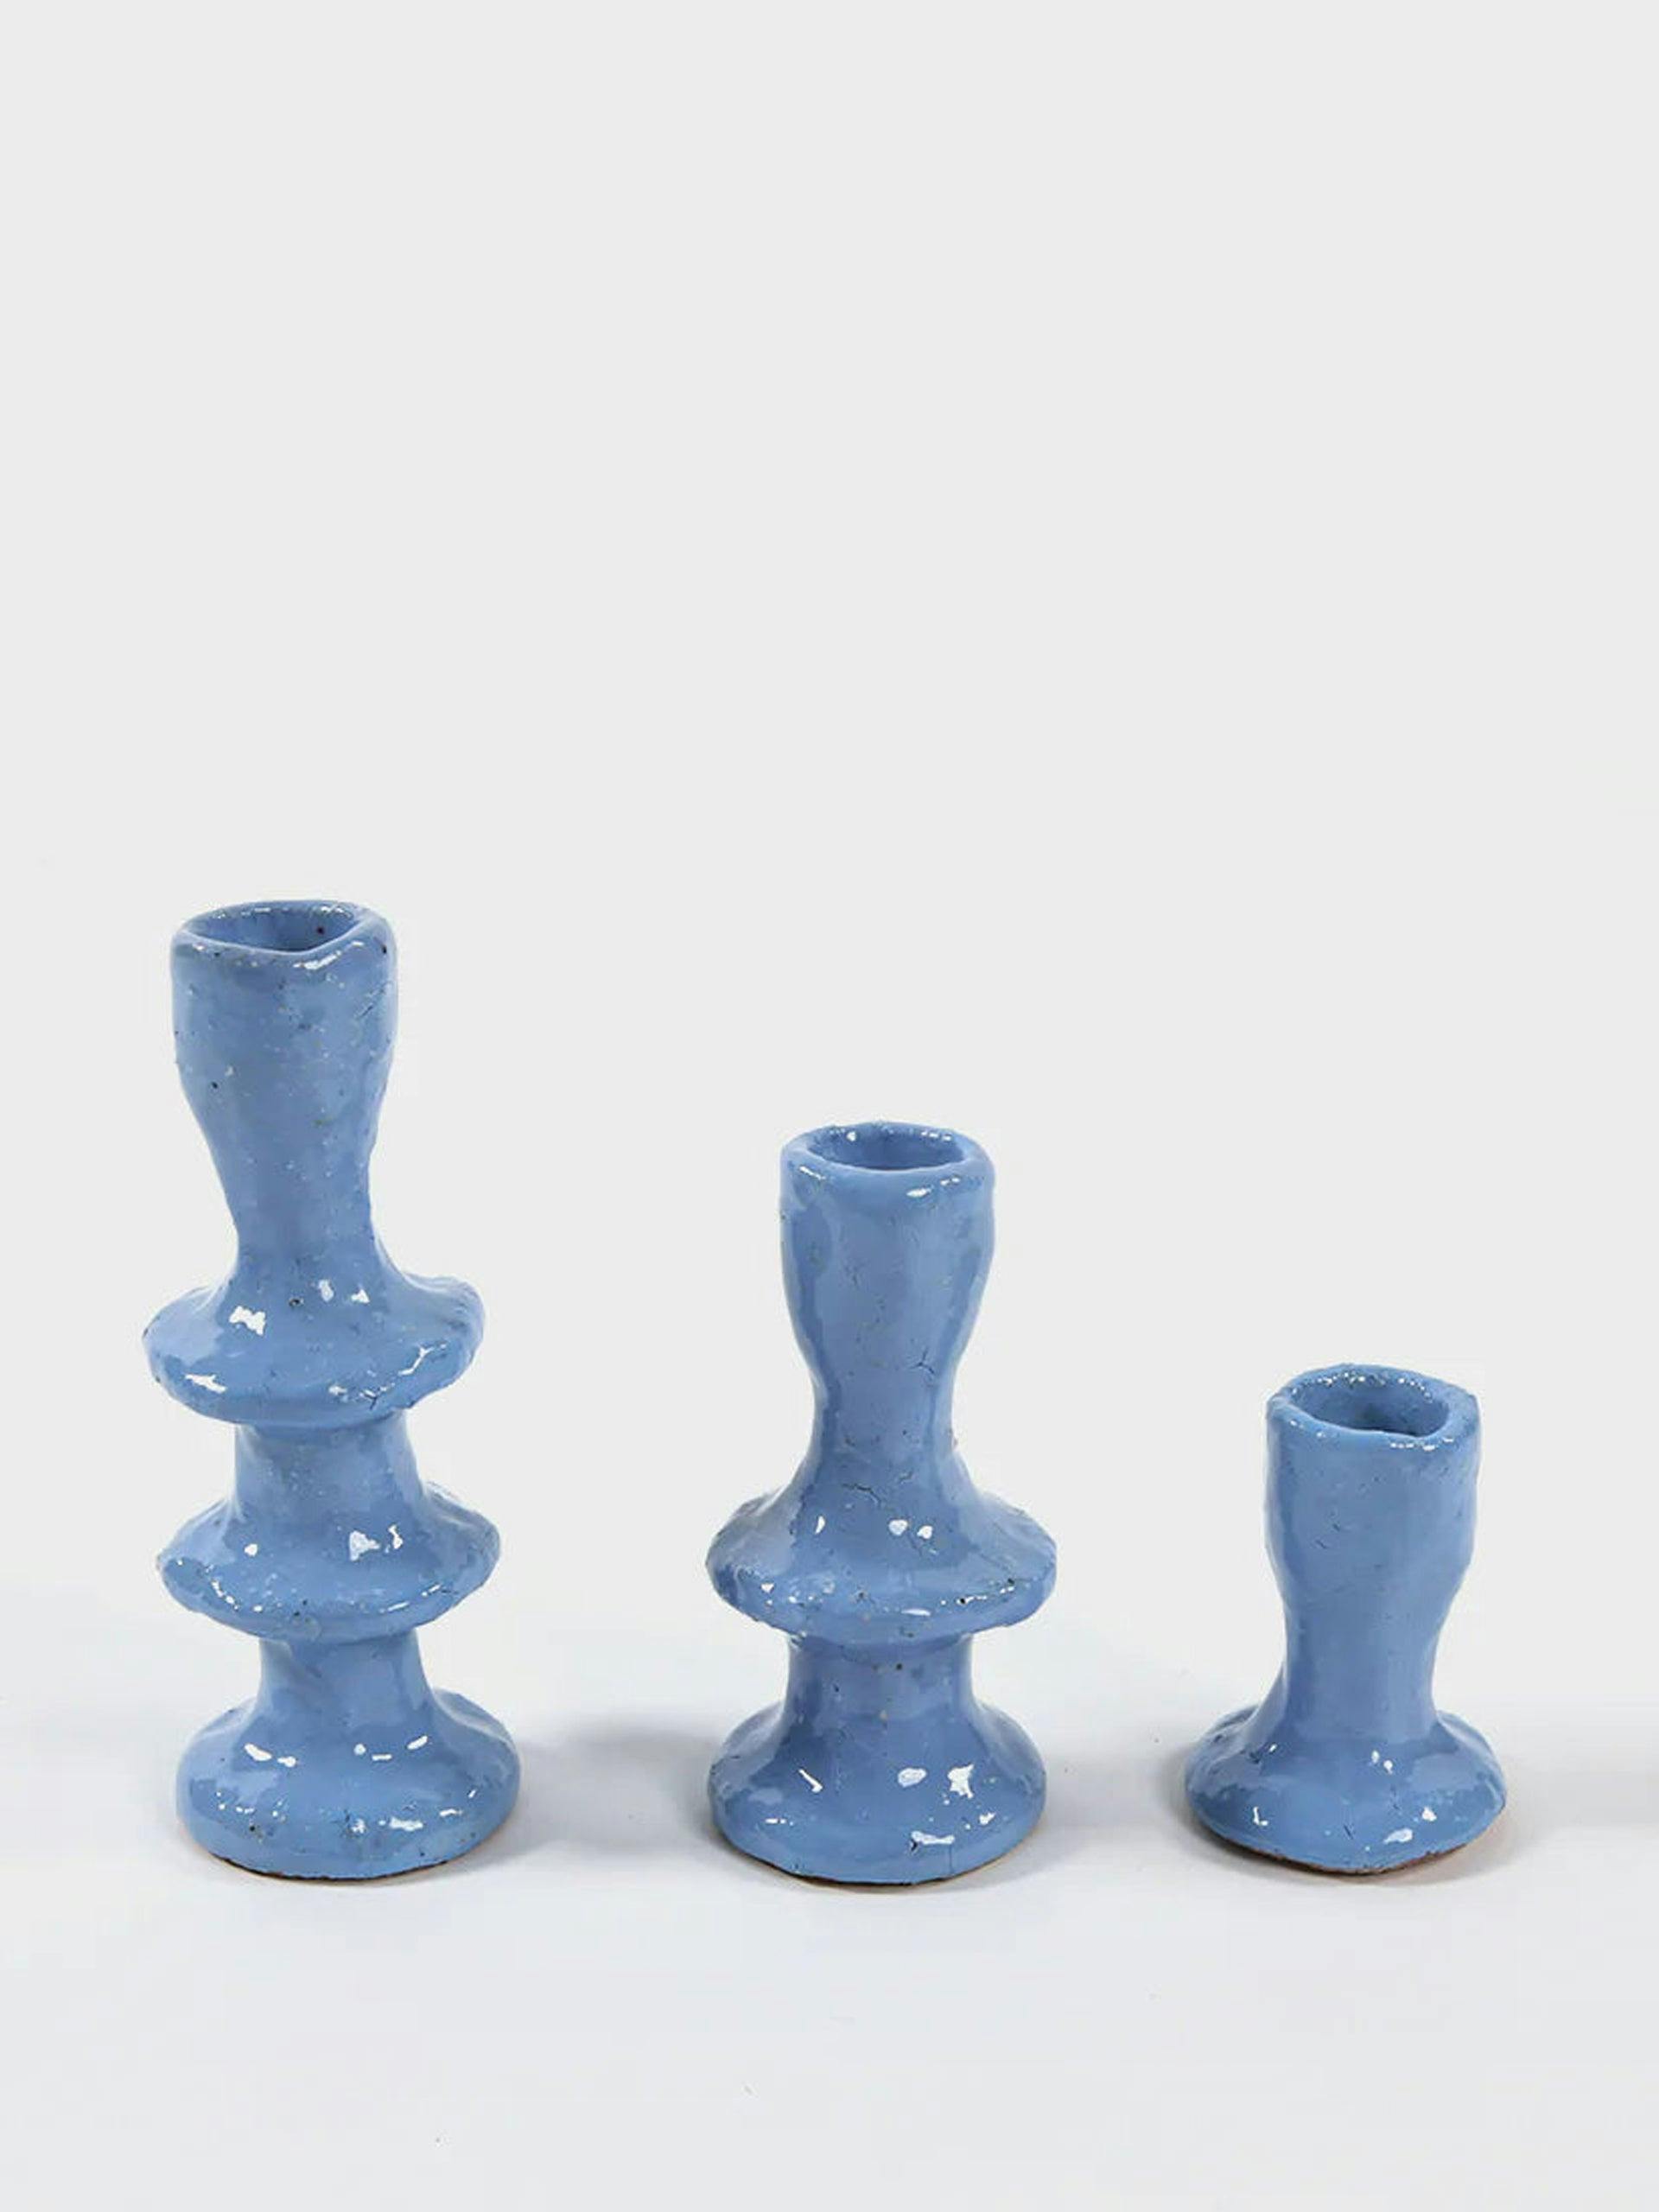 Wonky candlestick holder in baby blue